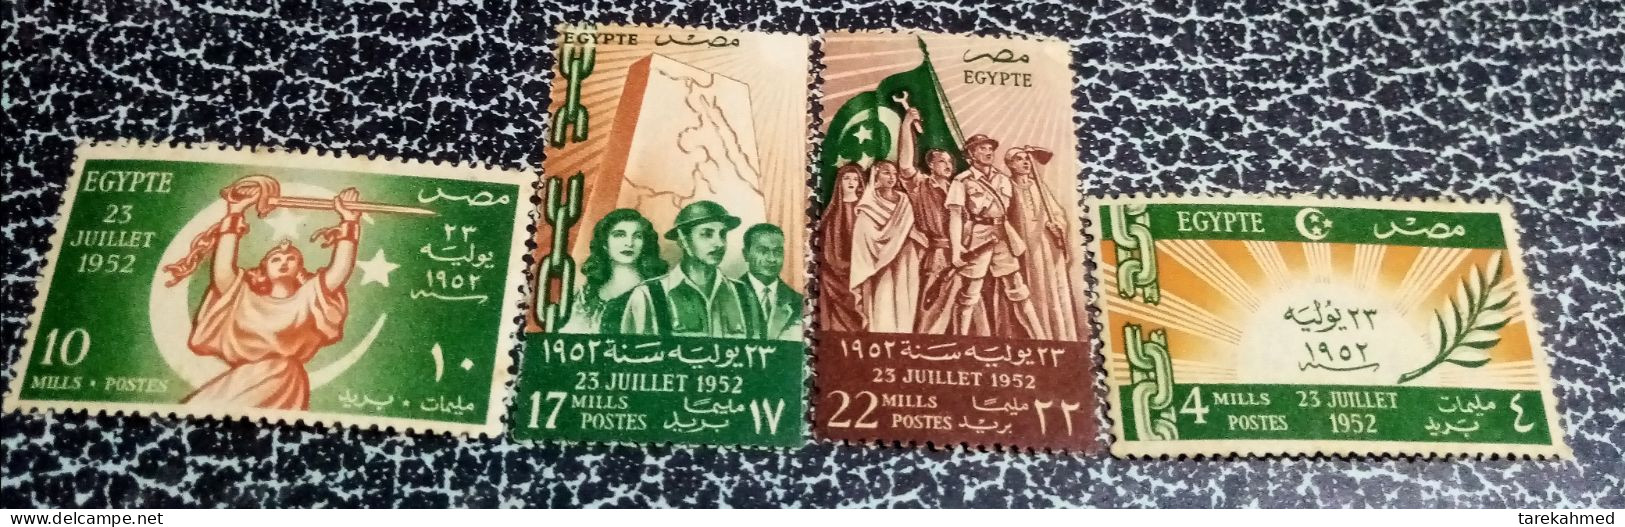 Egypt 1952 - Complete Set Of The Change Of Government, July 23 Revolution , 1952 )  - MNH - Nuovi